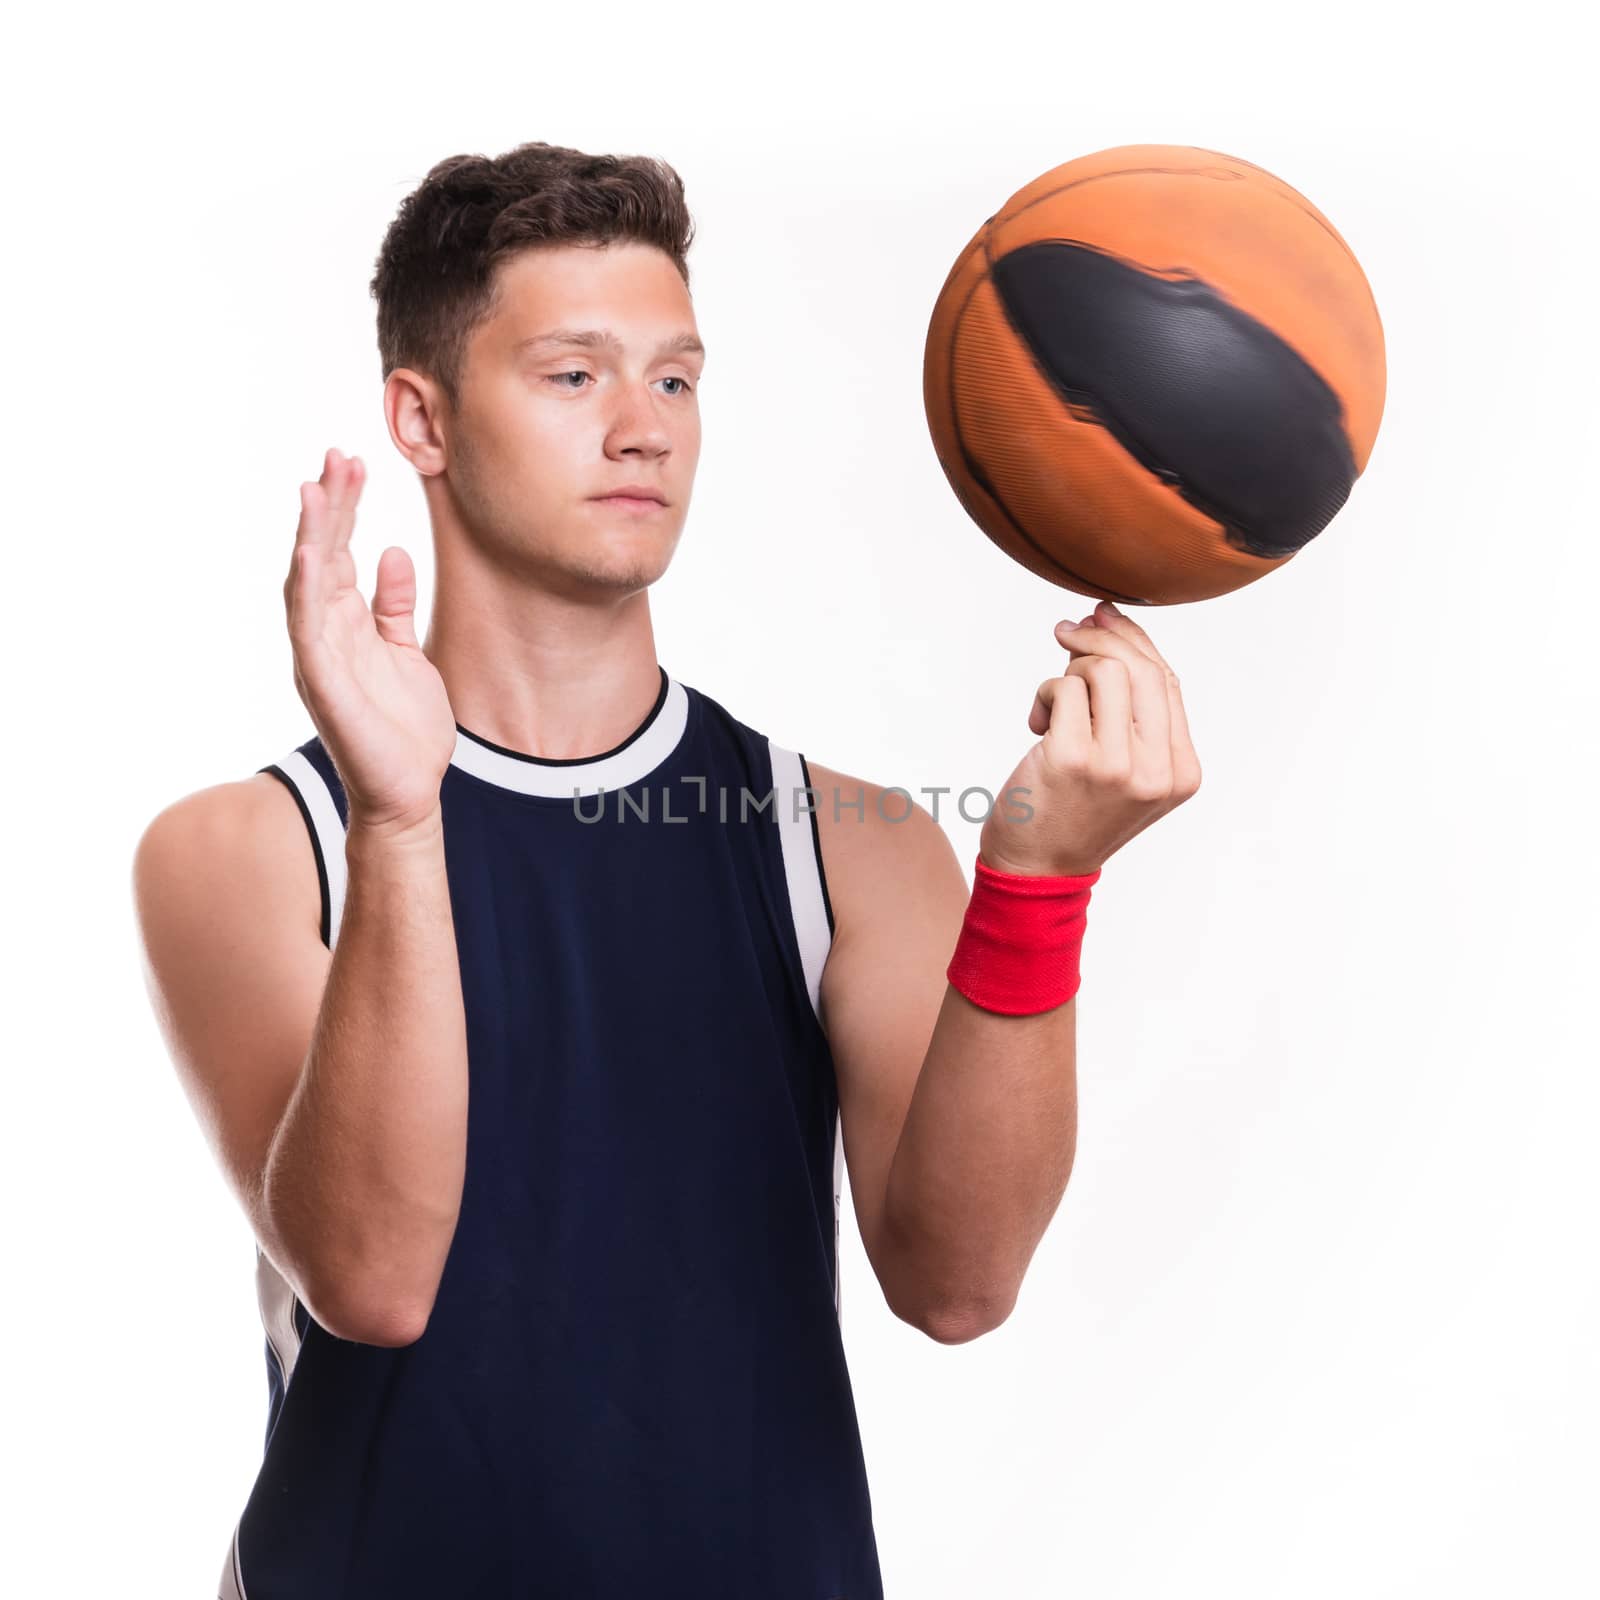 Basketball player spins the ball on his finger - studio shoot 